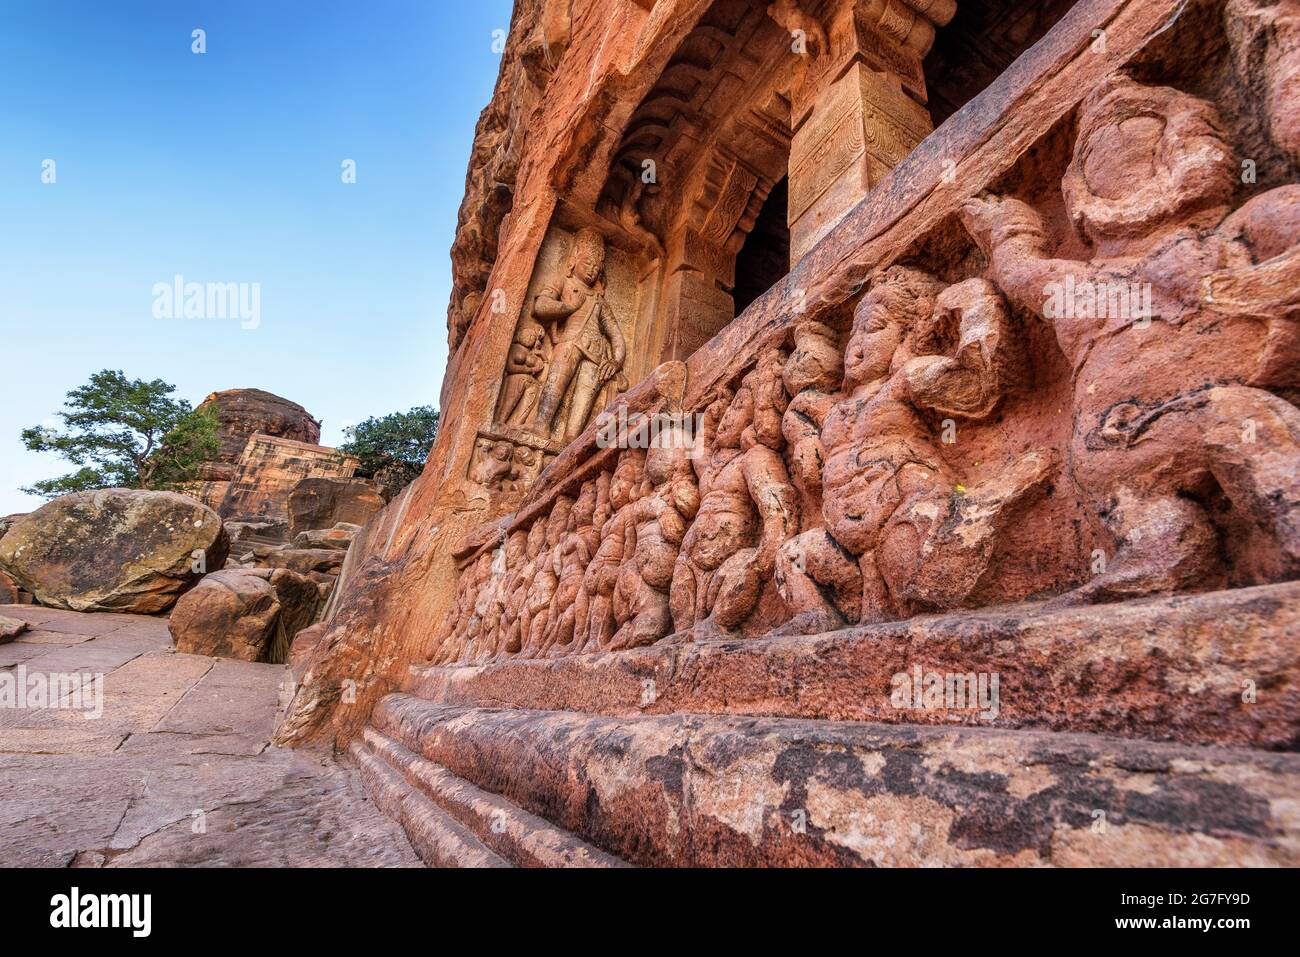 Badami Cave Temples, Karnataka. It is unesco heritage site and place of amazing chalukya dynasty sotne art. Stock Photo